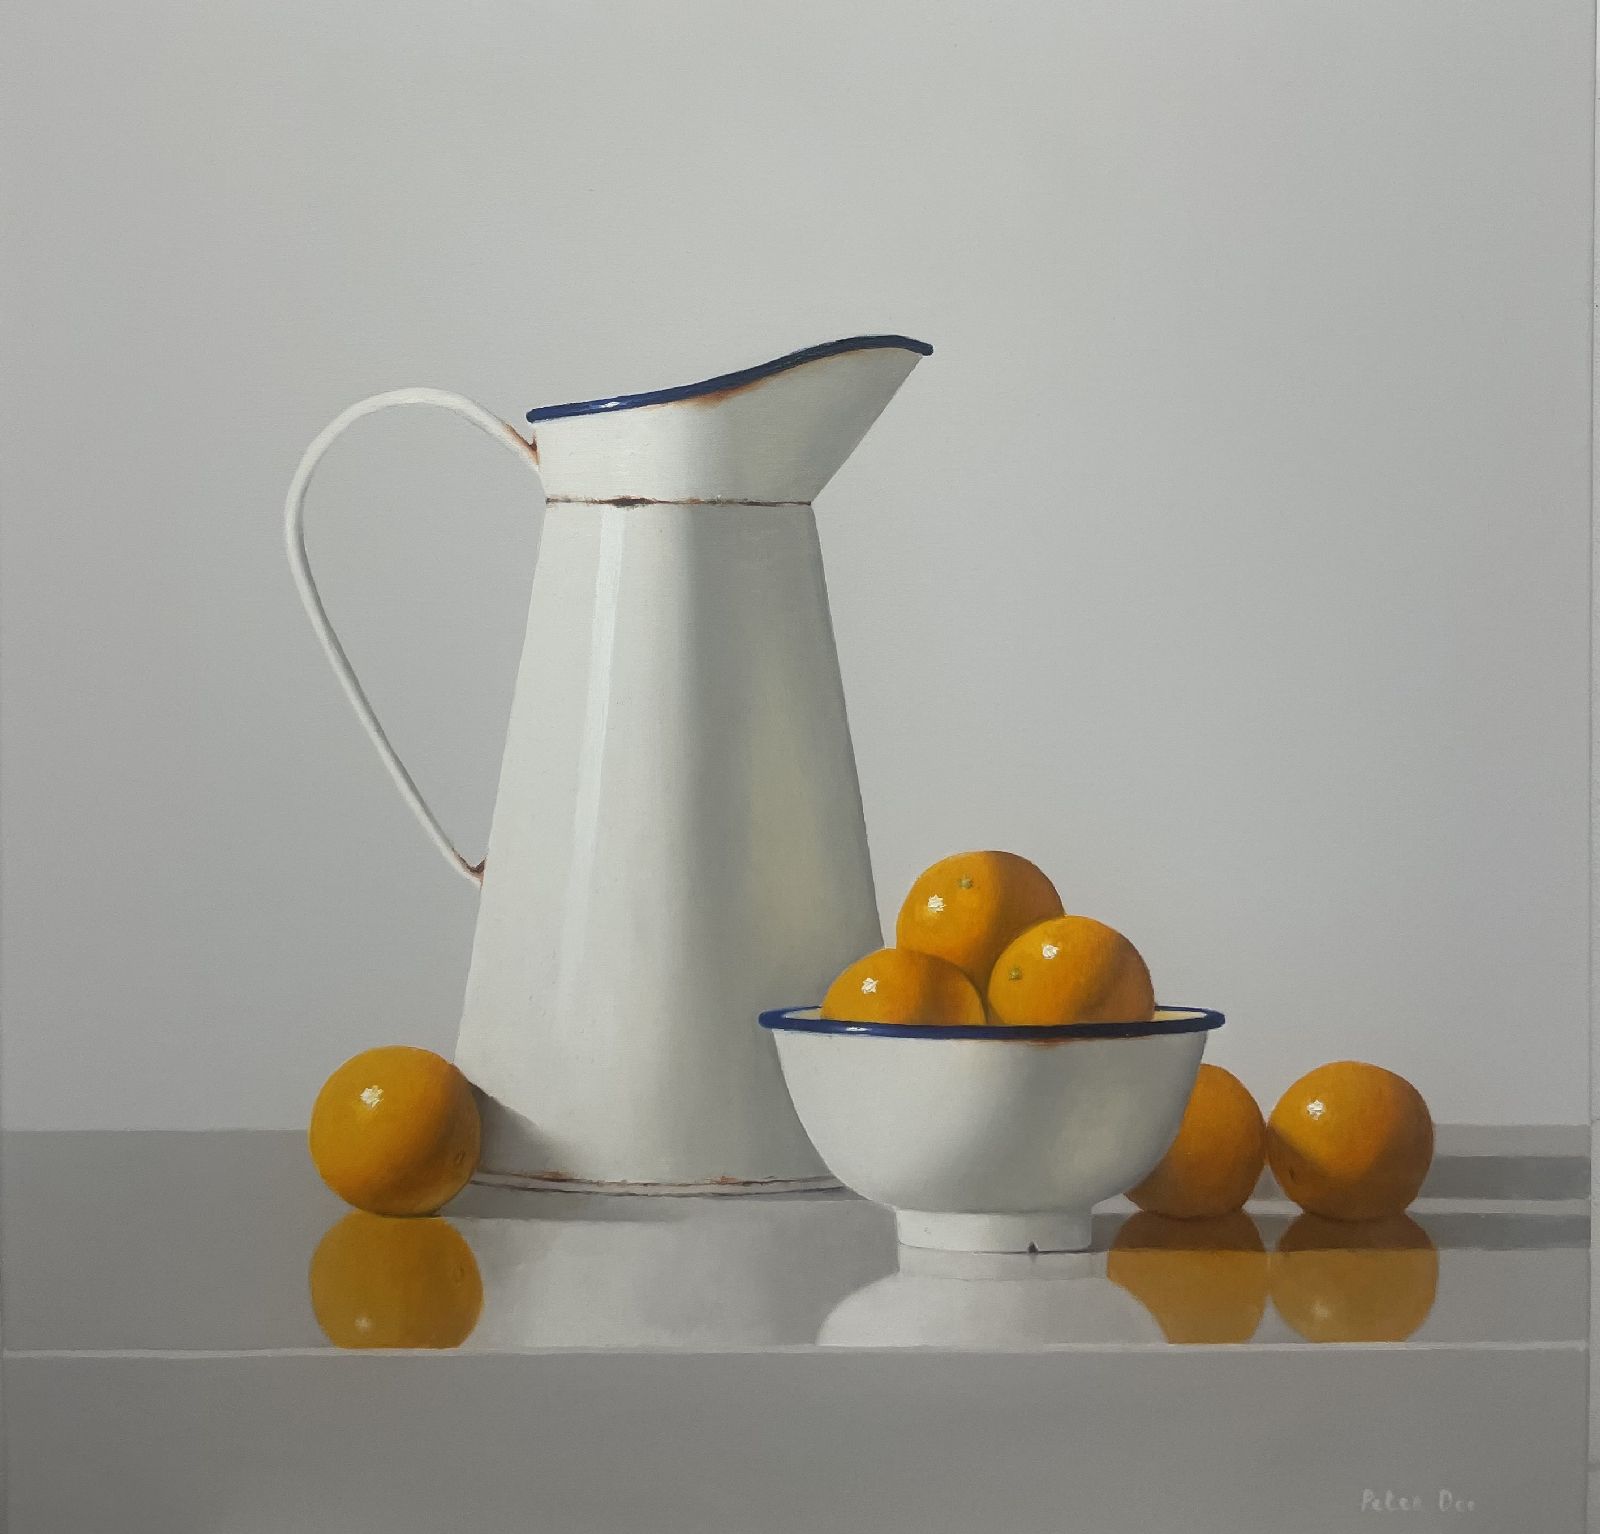 Peter Dee - White Vintage Enamelware Pitcher and Bowl with Oranges